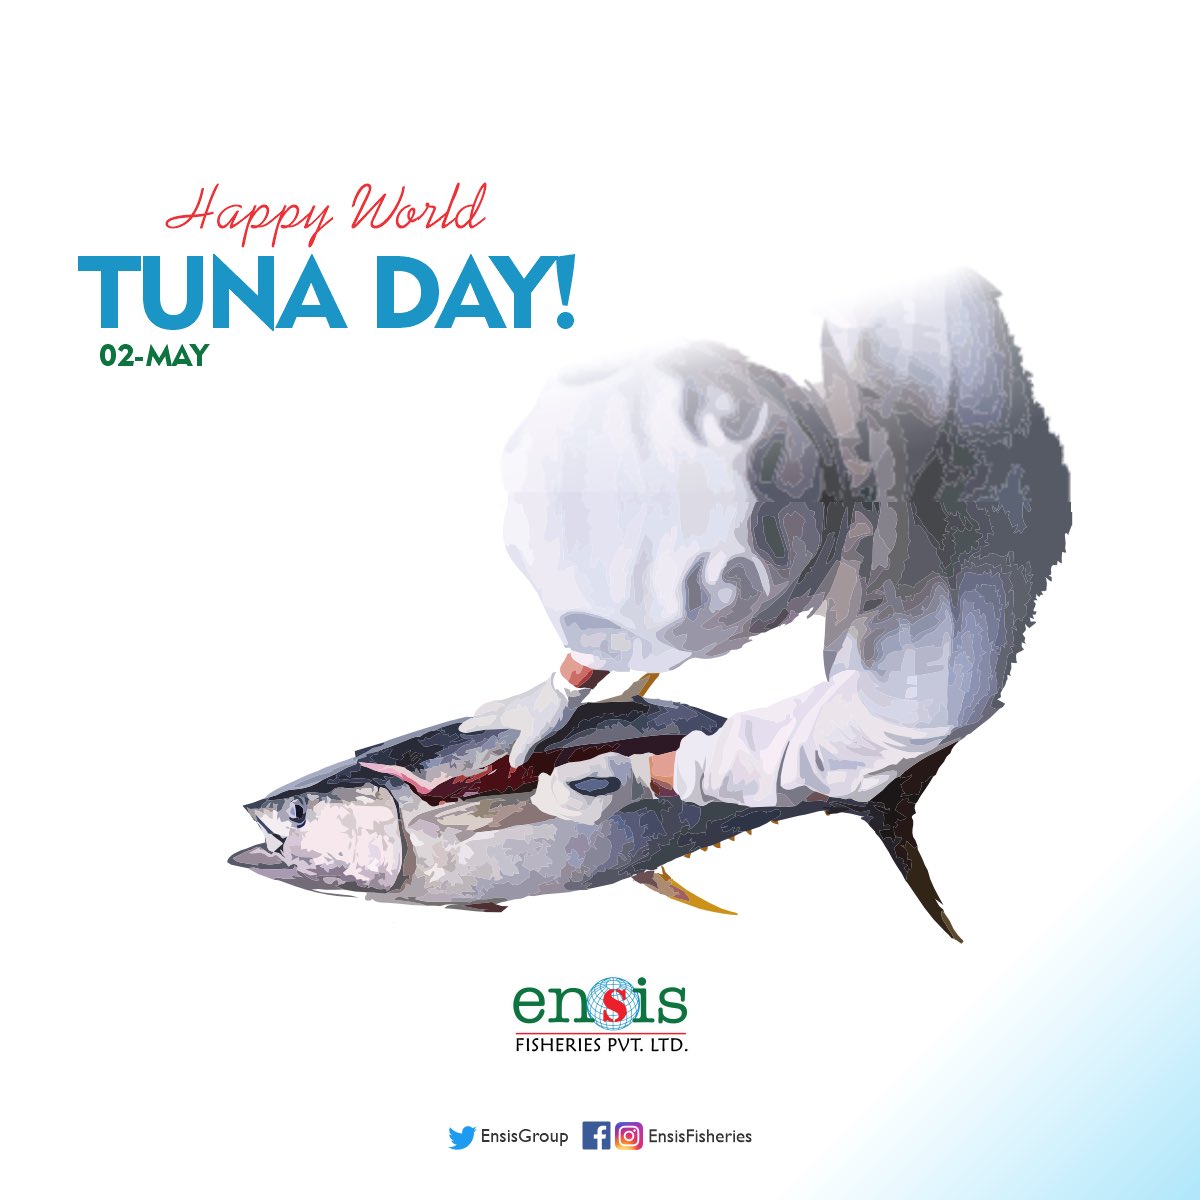 Happy World Tuna Day! 🌊🐟 

Let's celebrate sustainable fisheries and the vital role tuna plays in our oceans. 
Here's to protecting this incredible species for generations to come! 

#WorldTunaDay #SustainableFisheries